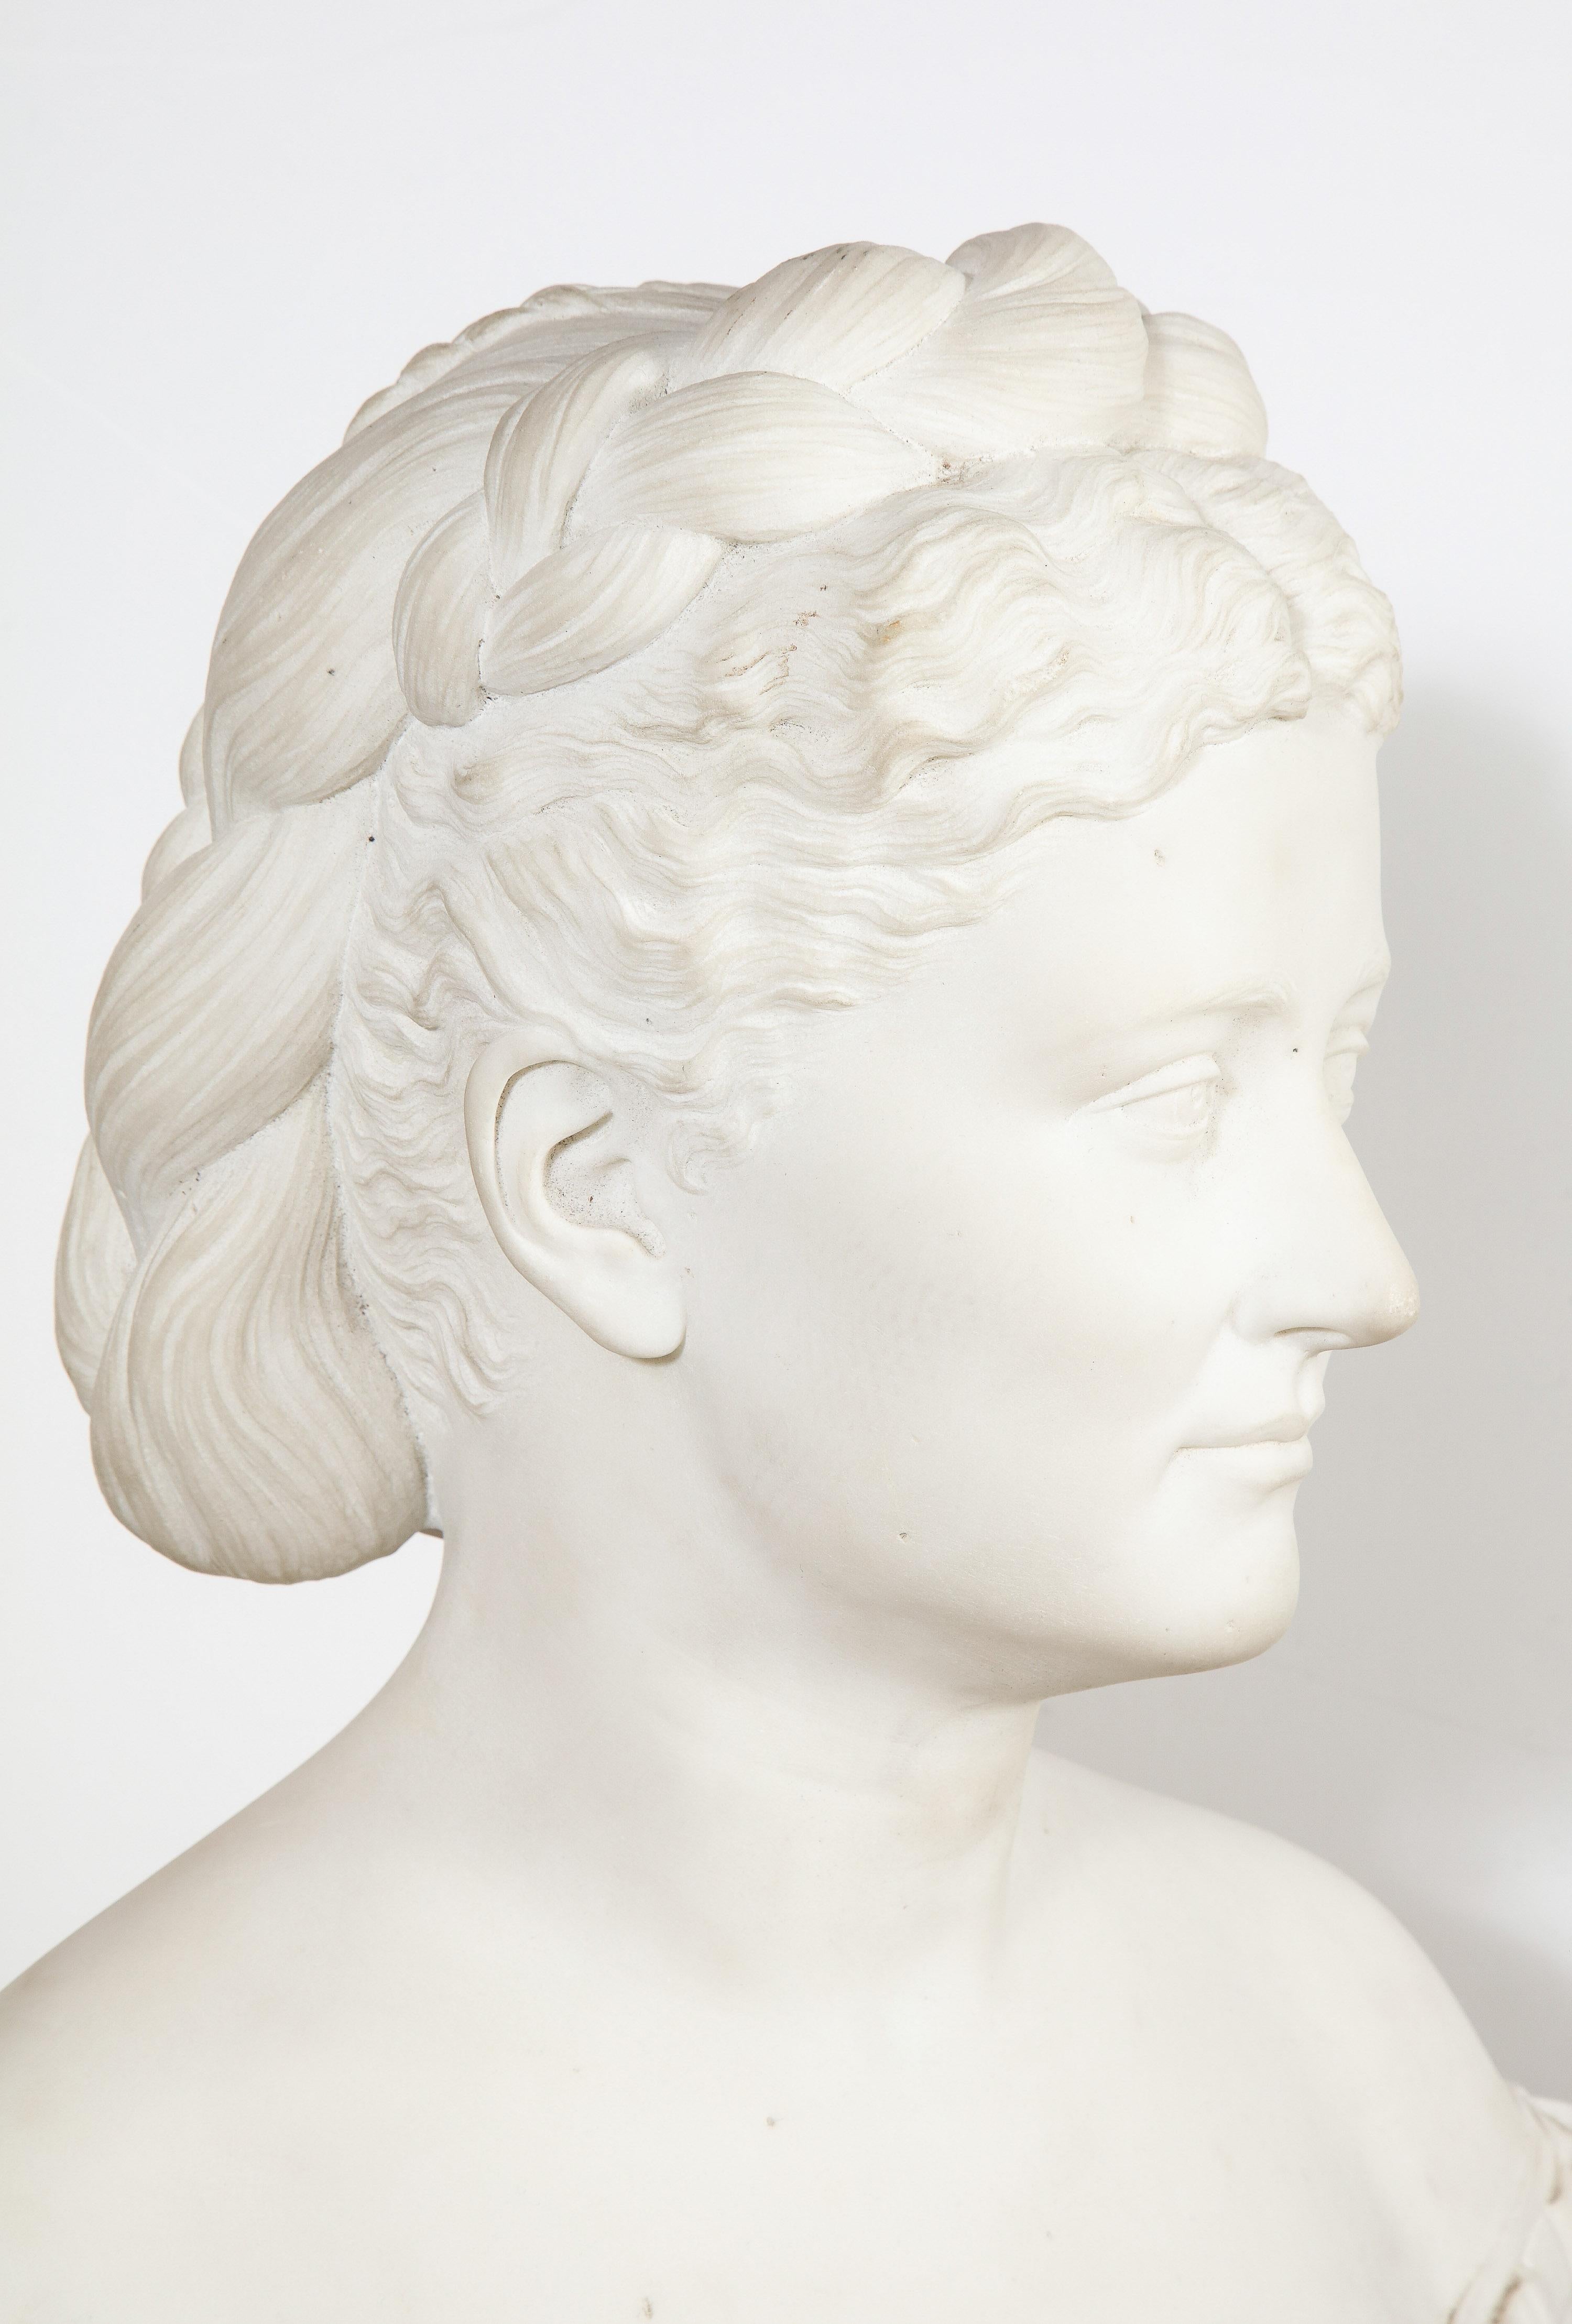 Thomas Ridgeway Gould, a Rare American White Marble Bust of a Woman For Sale 3